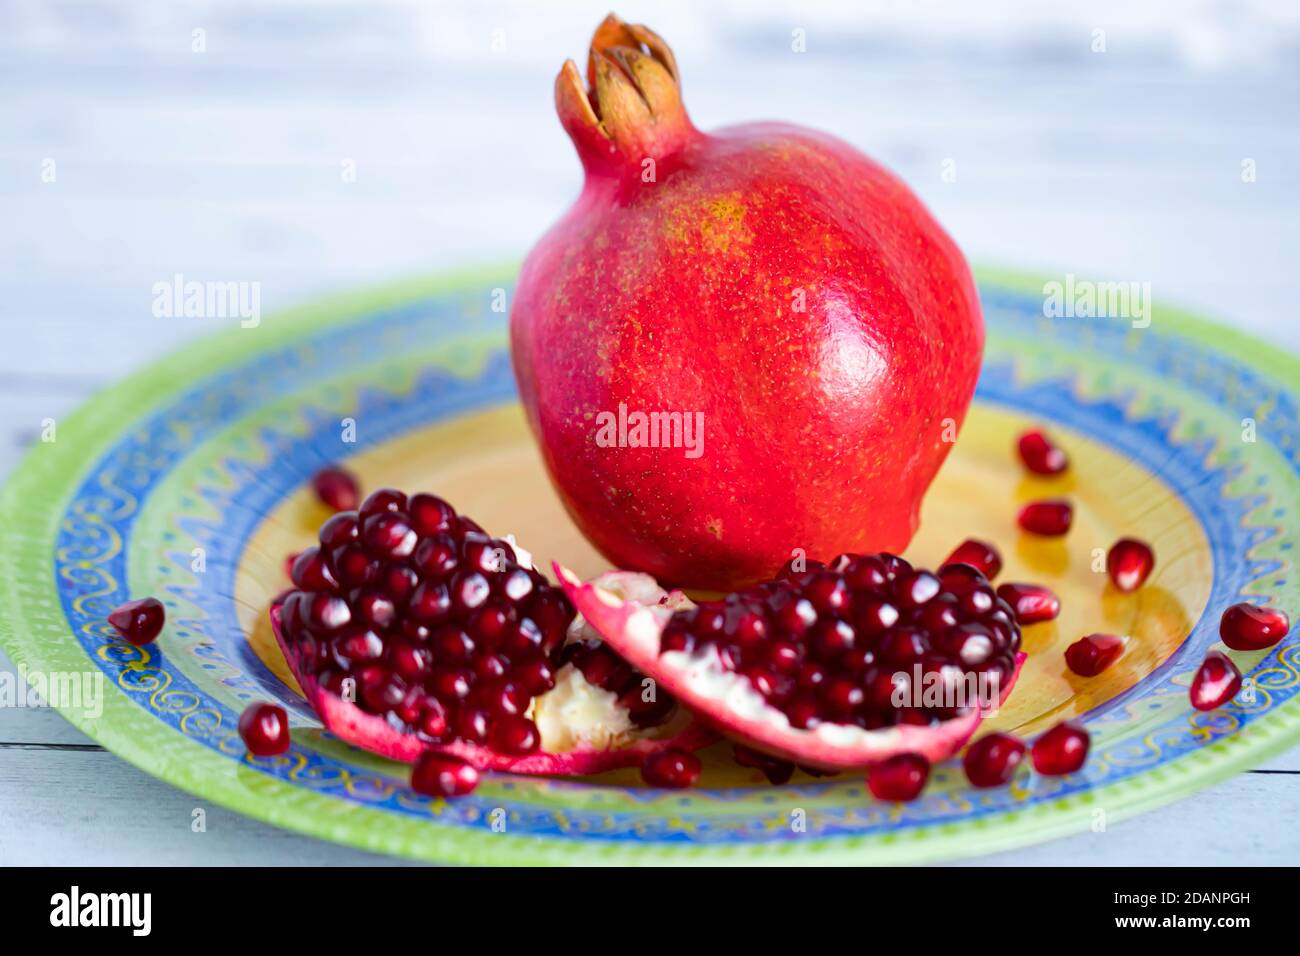 Red Gold Juicy Thick Textured Cut Pomegranate with Seeds Throw